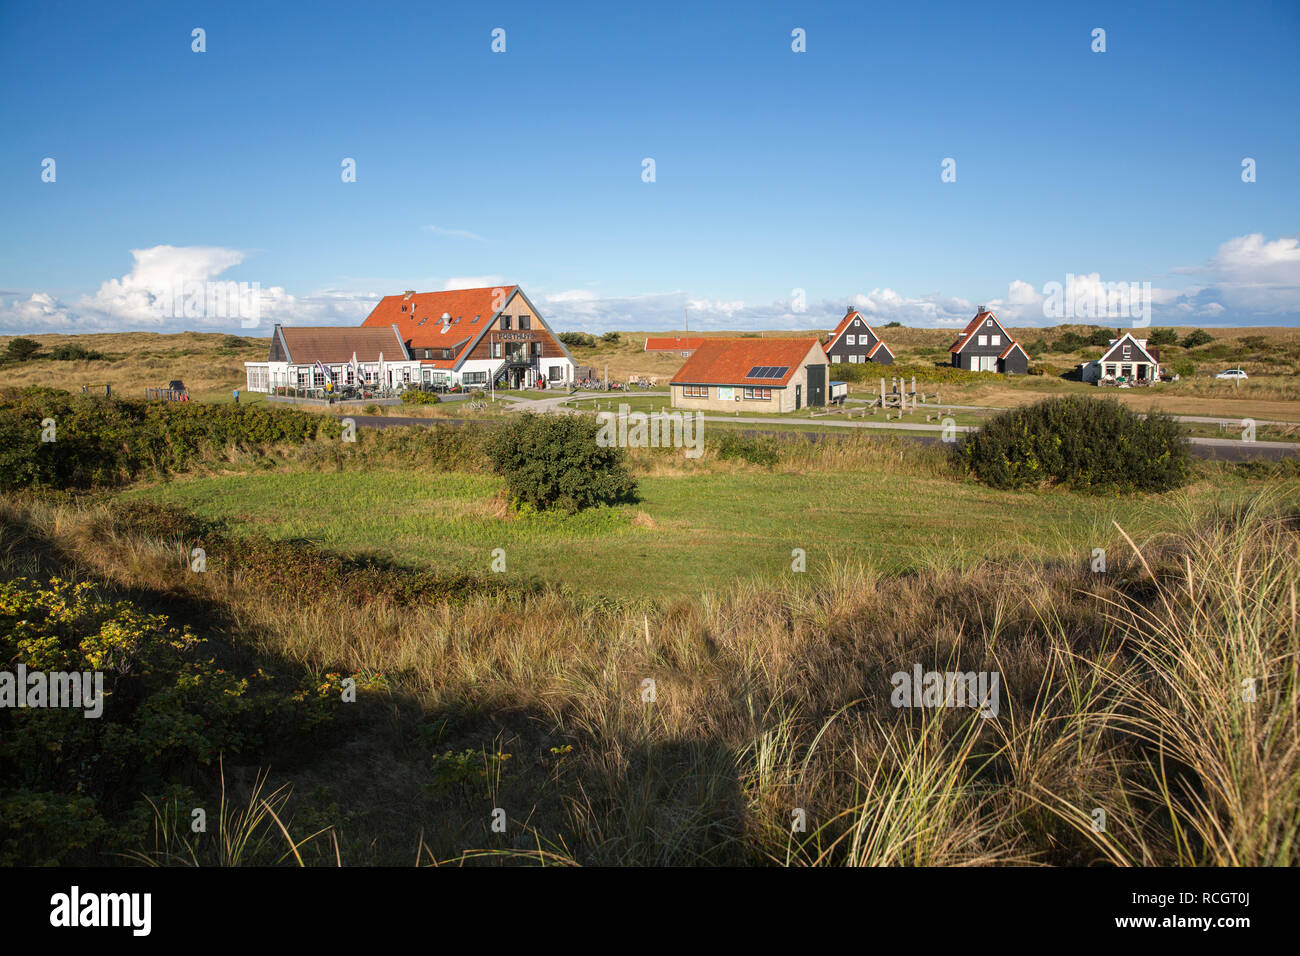 The Netherlands, Vlieland, Posthuis hotel and restaurant. Stock Photo